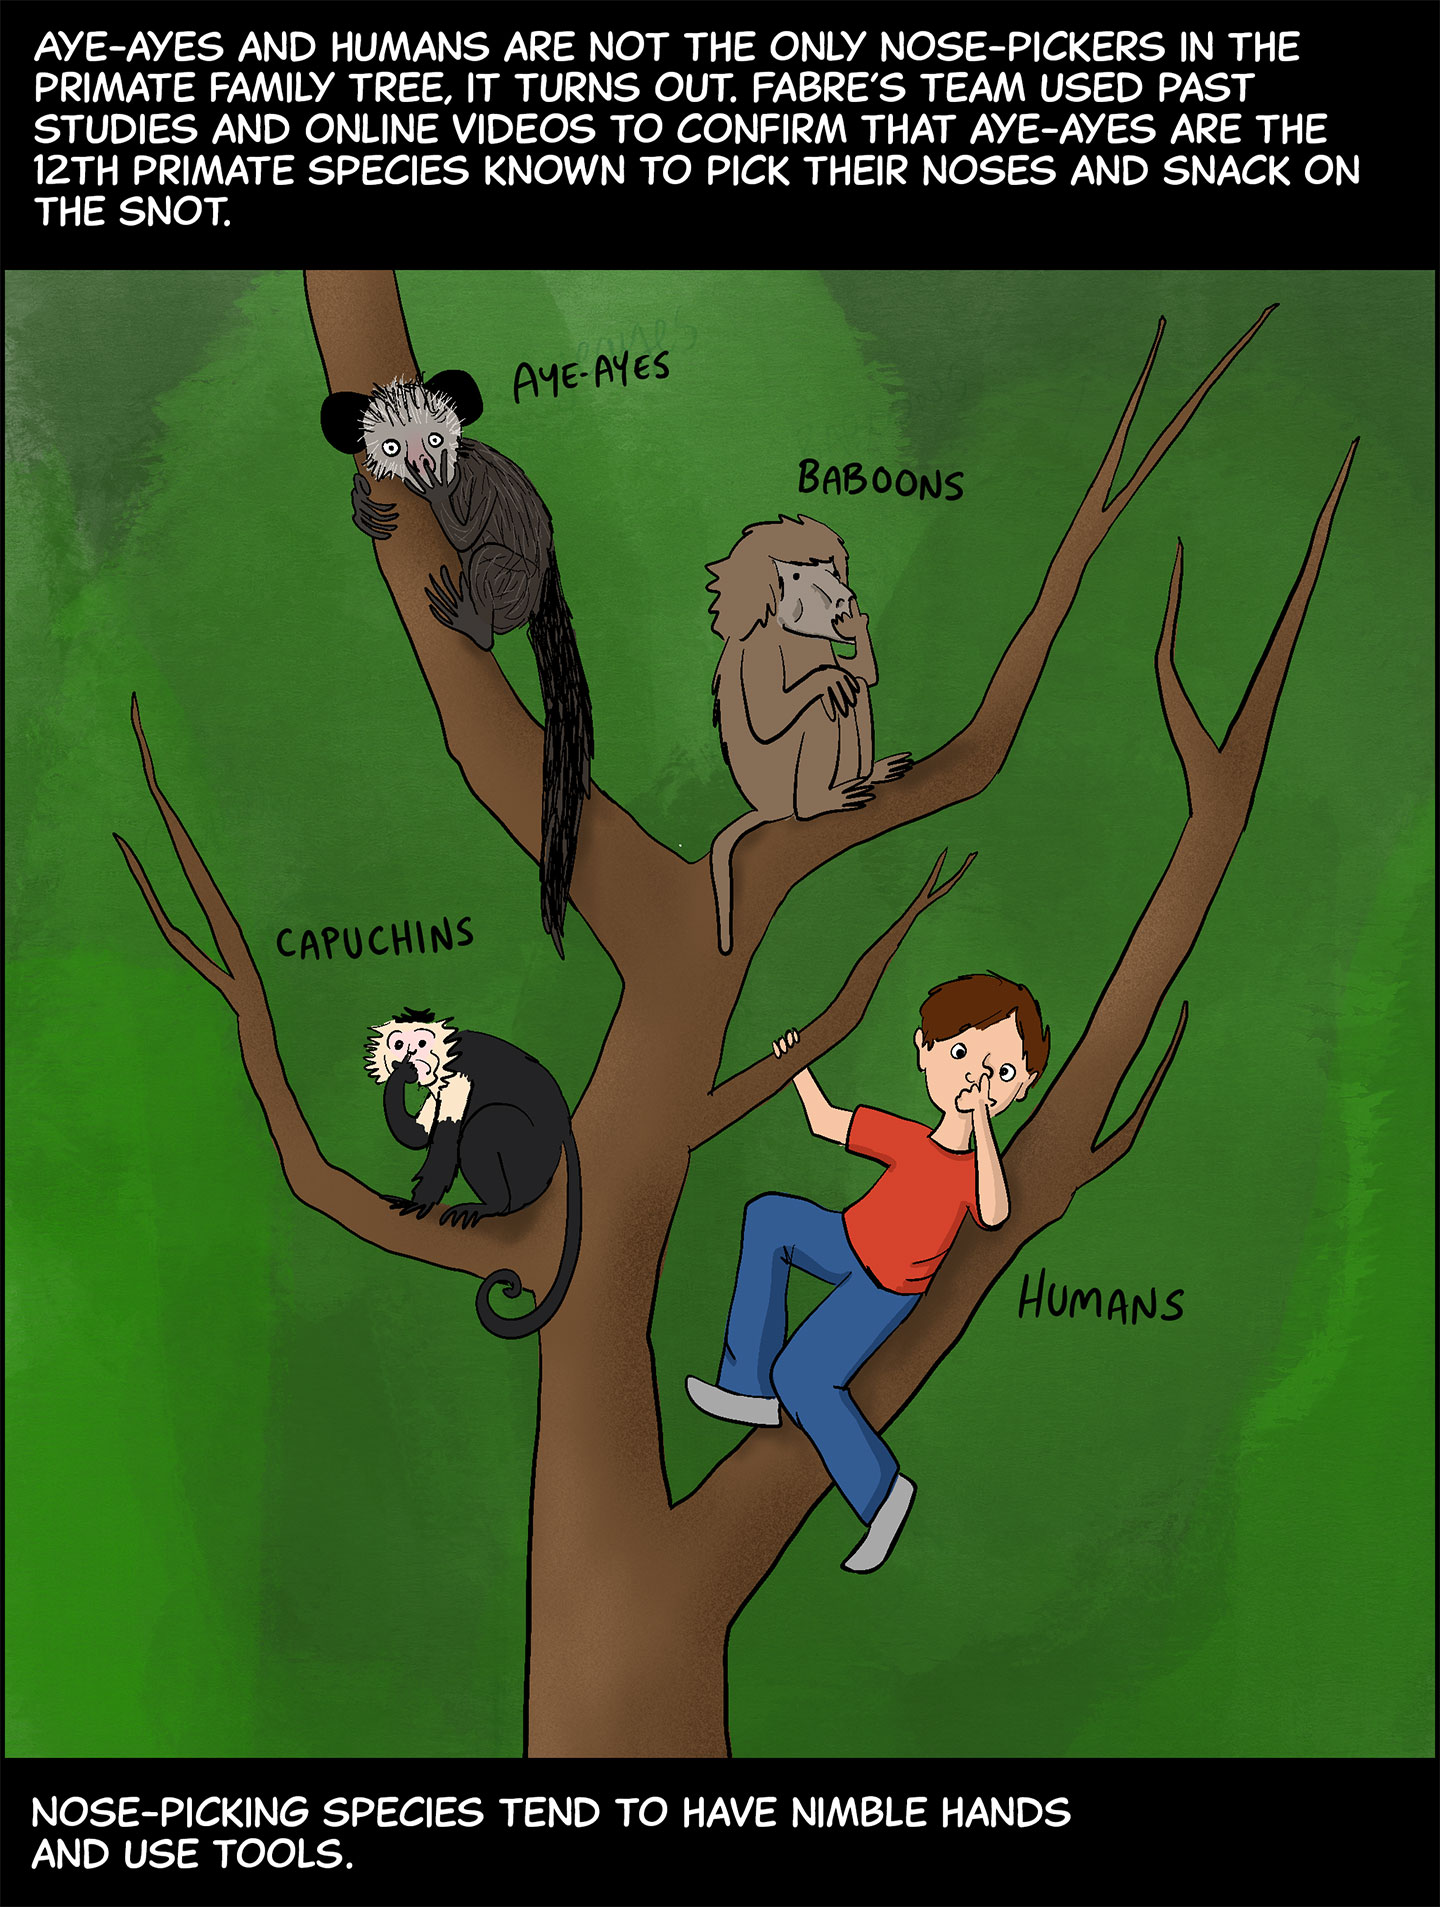 Panel 6. Text (above image): Aye-ayes and humans are not the only nose-pickers in the primate family tree, it turns out. Fabre’s team used past studies and online videos to confirm that aye-ayes are the 12th primate species known to pick their noses and snack on the snot. Image: An aye-aye, a baboon, a capuchin monkey and a white boy wearing a red shirt and jeans all sit on different branches of a tree, all picking their noses. Text (below image): Nose-picking species tend to have nimble hands and use tools. 